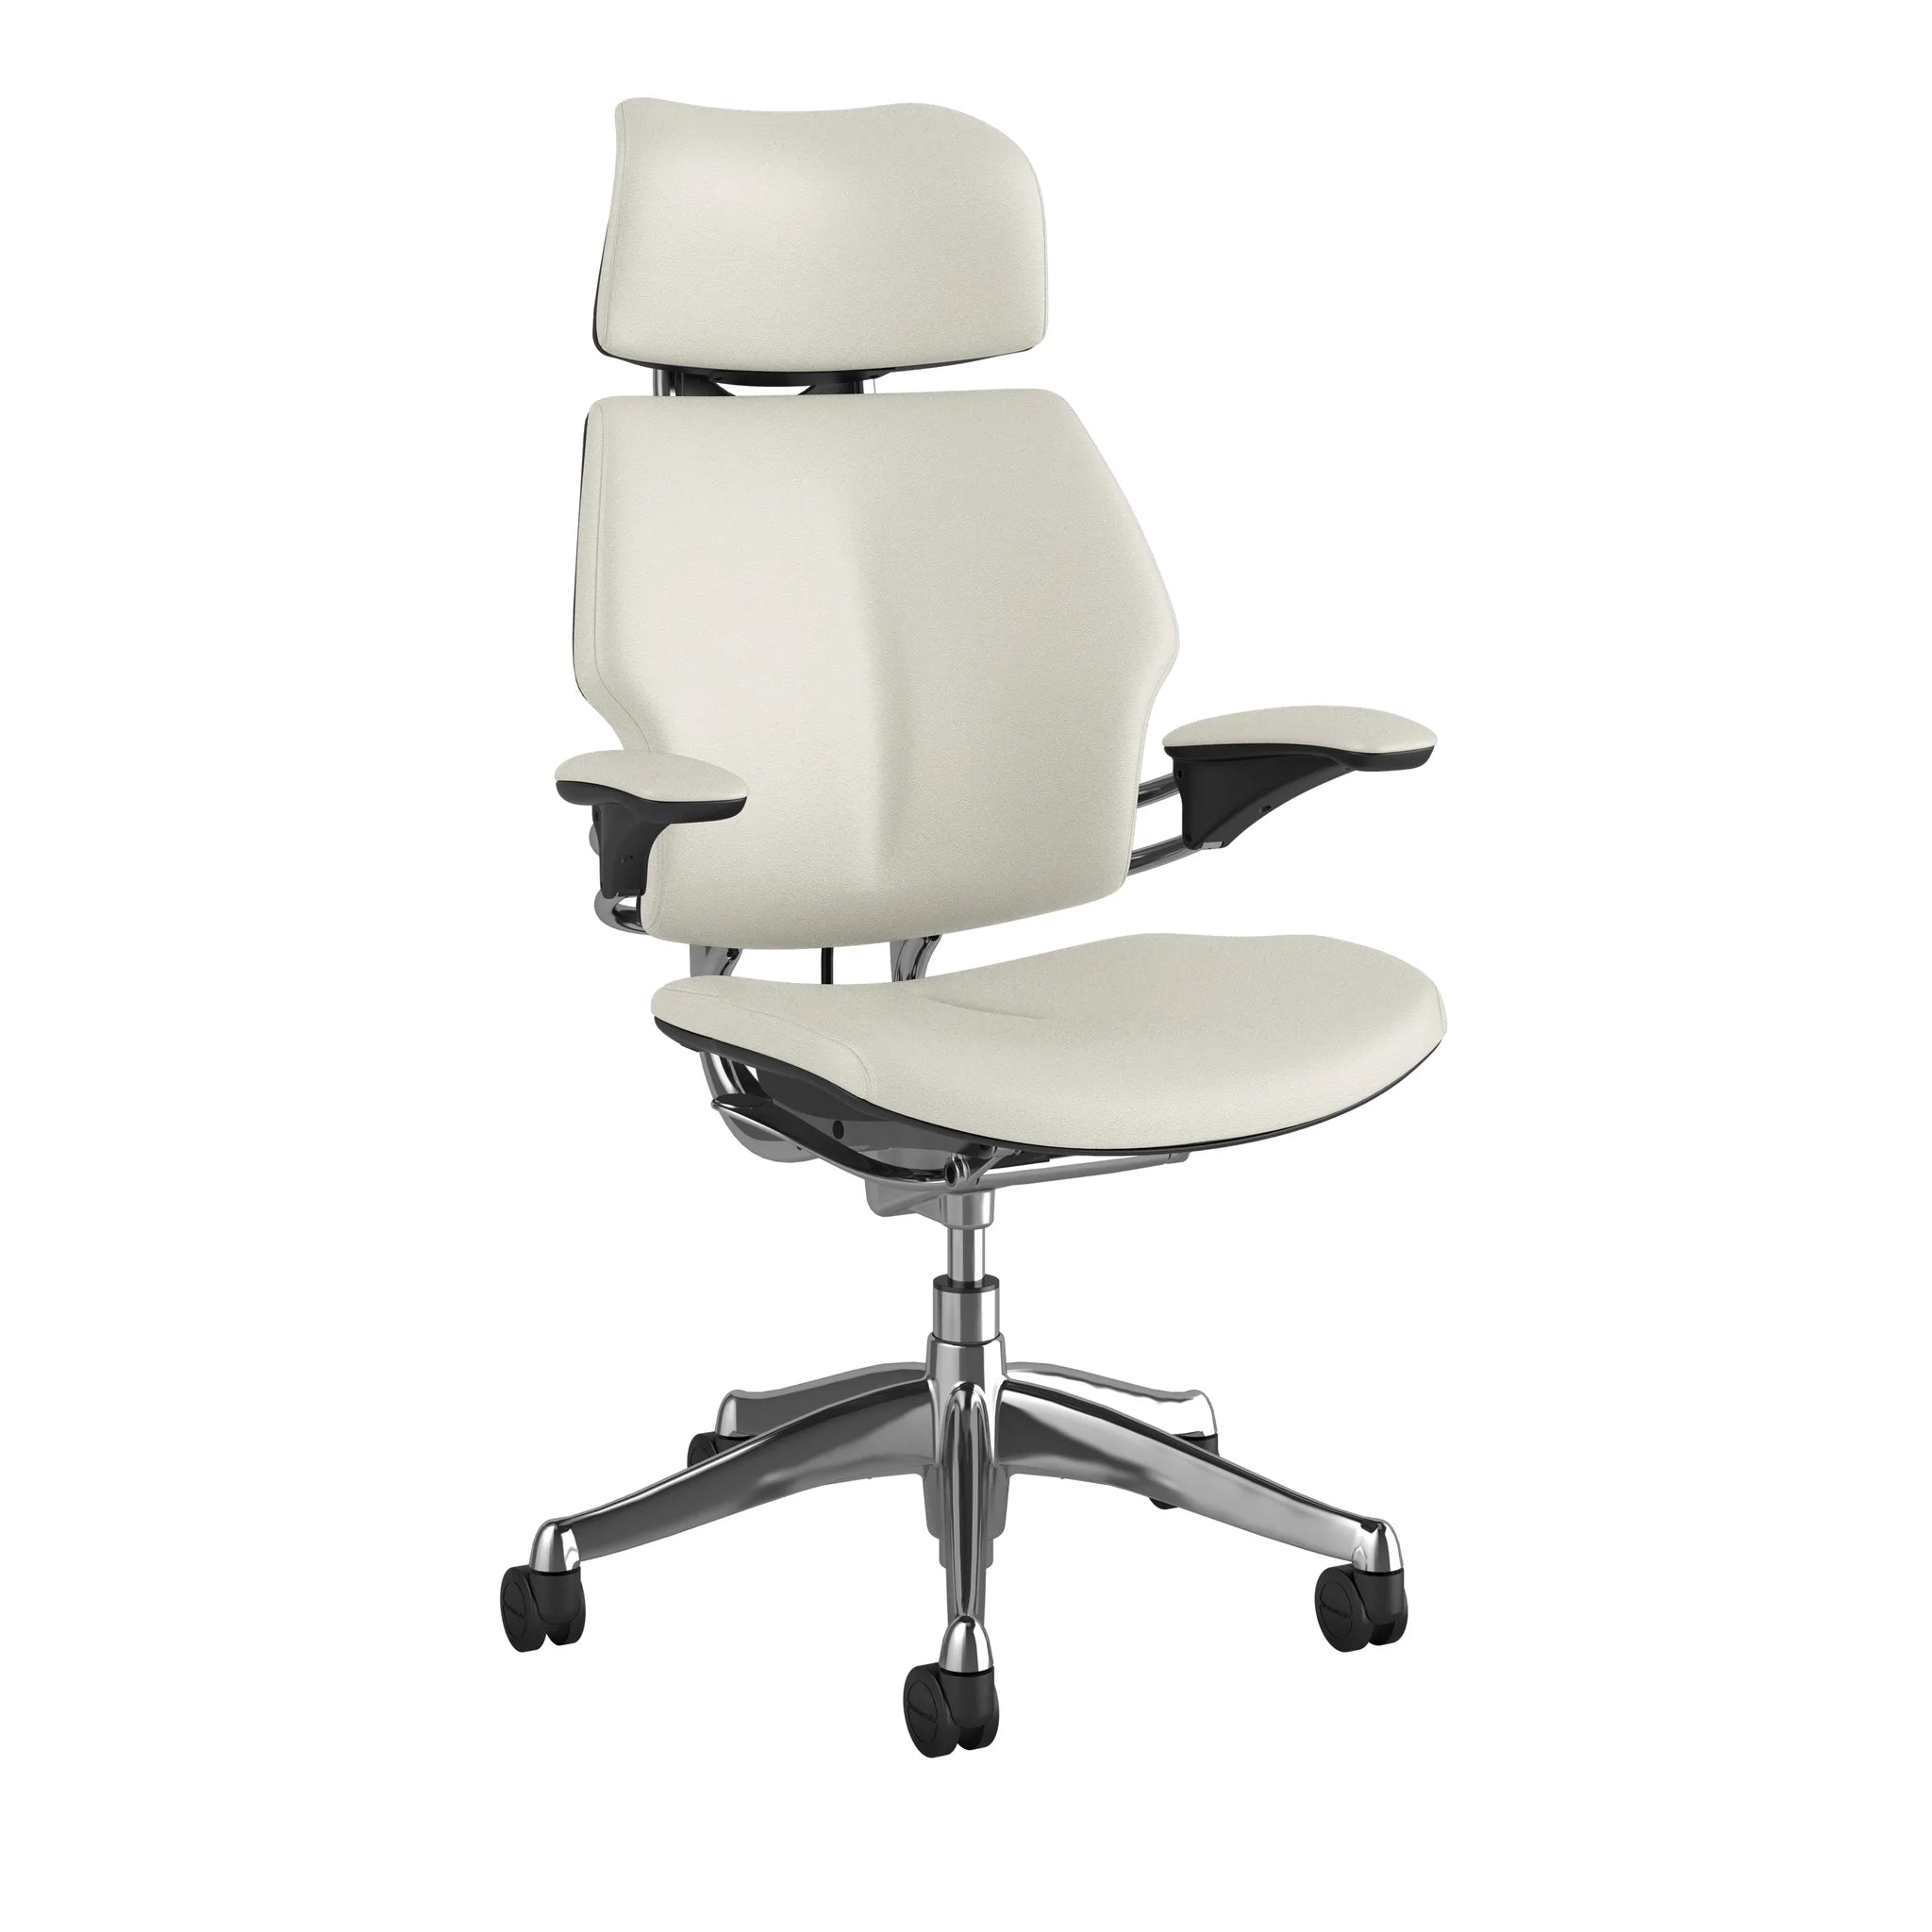 Humanscale Freedom Headrest Premium White Leather Chair - Open Box